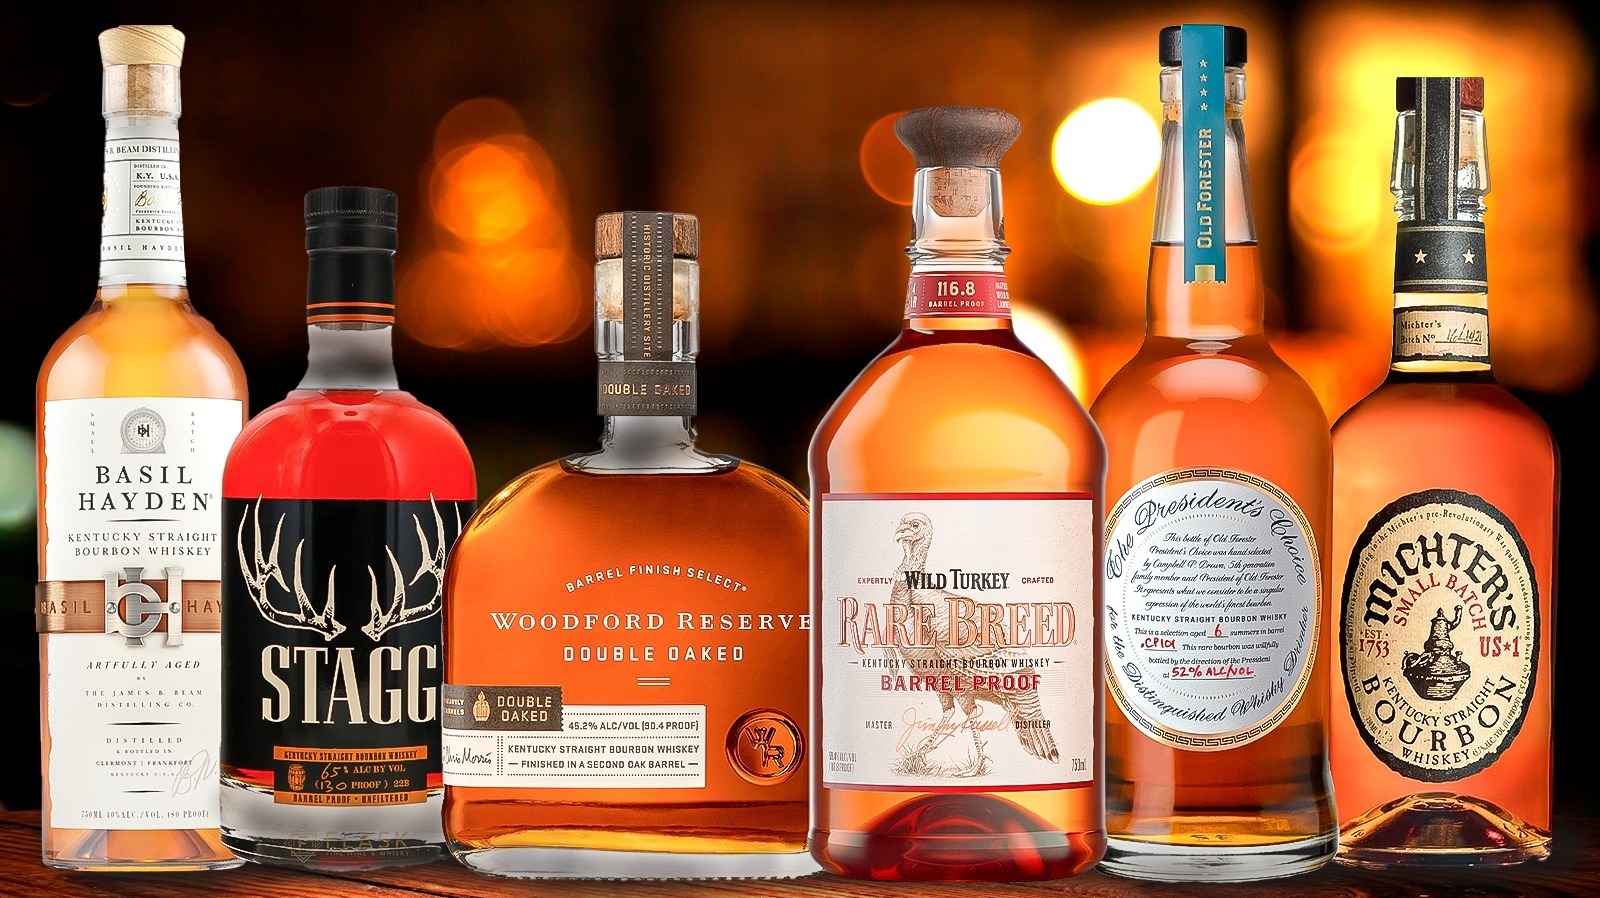 https://www.tastingtable.com/img/gallery/30-top-shelf-bourbons-you-should-know/l-intro-1697639765.jpg